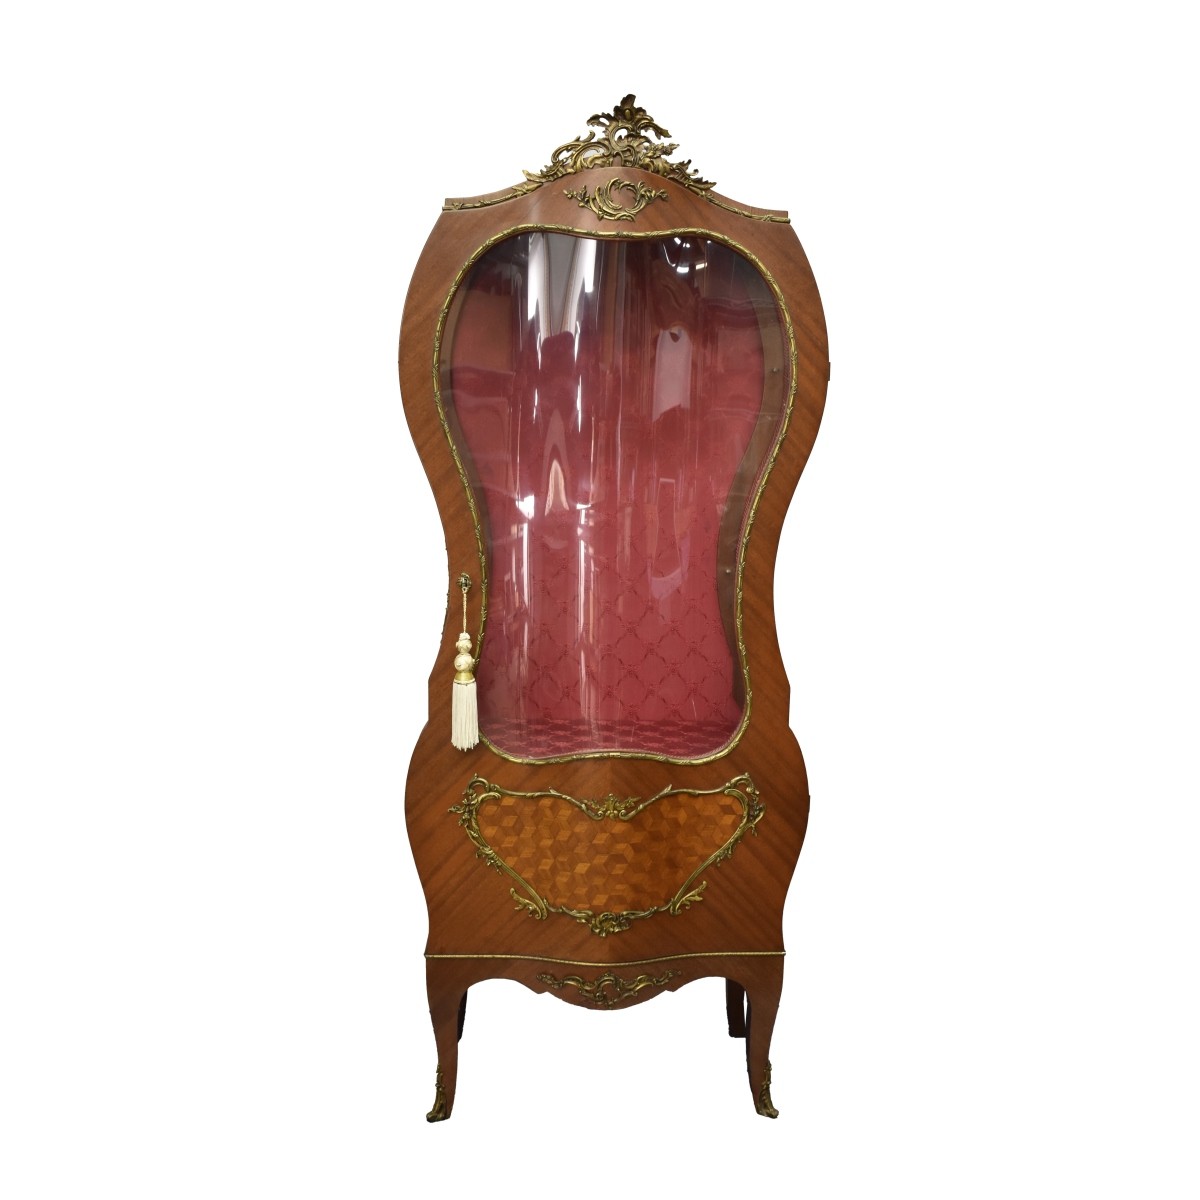 Mid 20th C. Louis XVI Style Display Cabinet